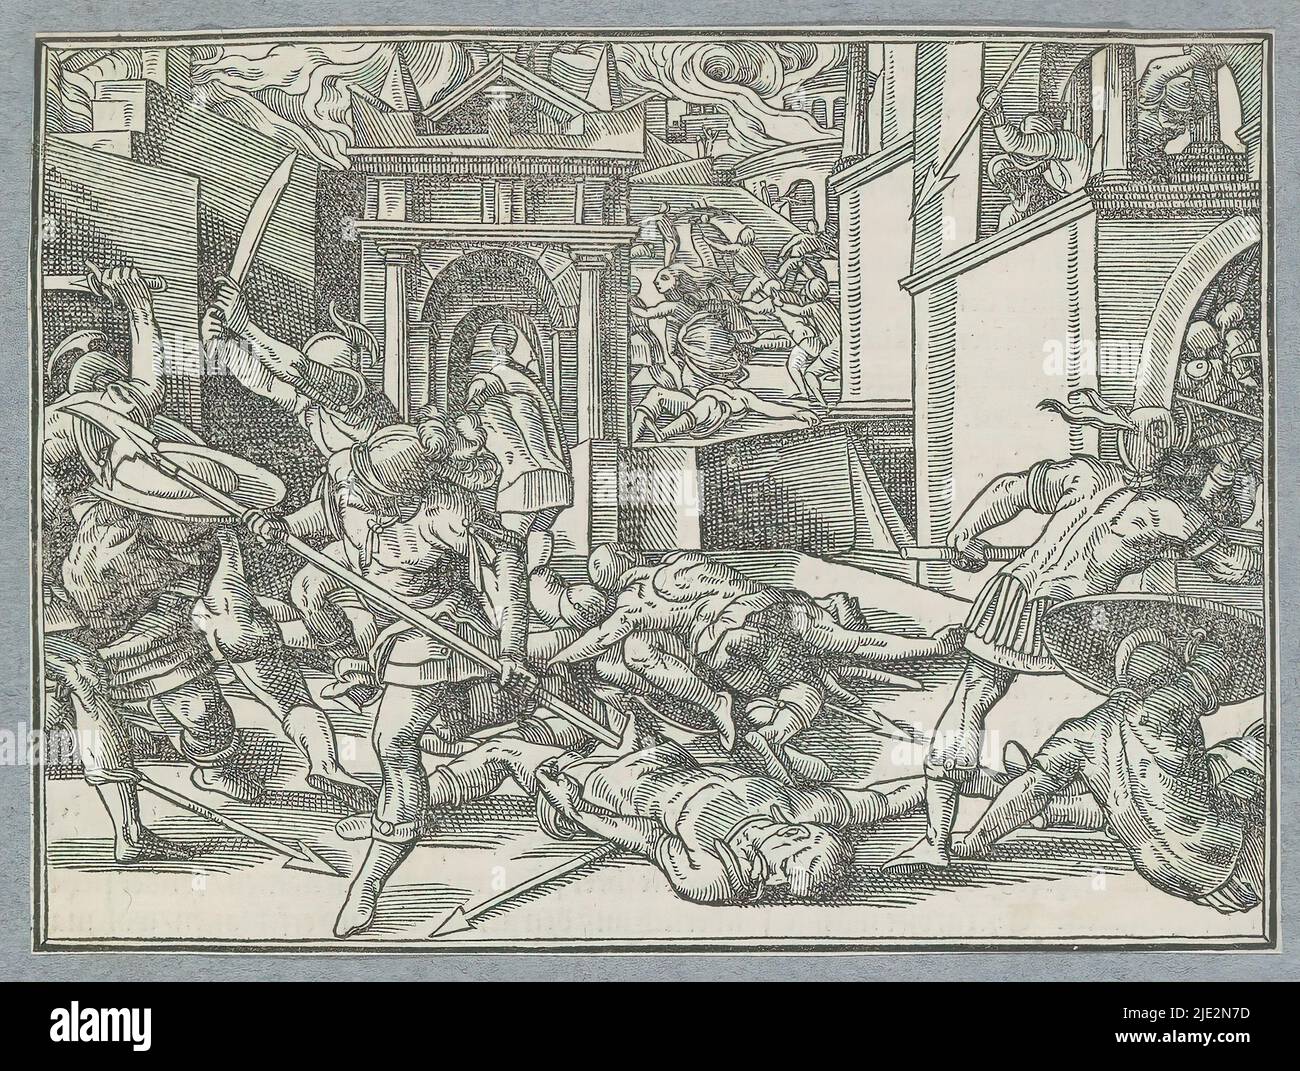 Fighting soldiers in a city, Fight in Jerusalem, Warriors with swords and spears are fighting each other inside the walls of a city. In the background, residents flee and buildings are on fire. The depiction has been used in part to depict the fall of the city of Jerusalem in 70 AD and the destruction of the Great Temple by Titus. The print is part of an album., print maker: Christoffel van Sichem (I), after design by: Tobias Stimmer, Amsterdam, 1574, paper, letterpress printing, height 110 mm × width 149 mm Stock Photo